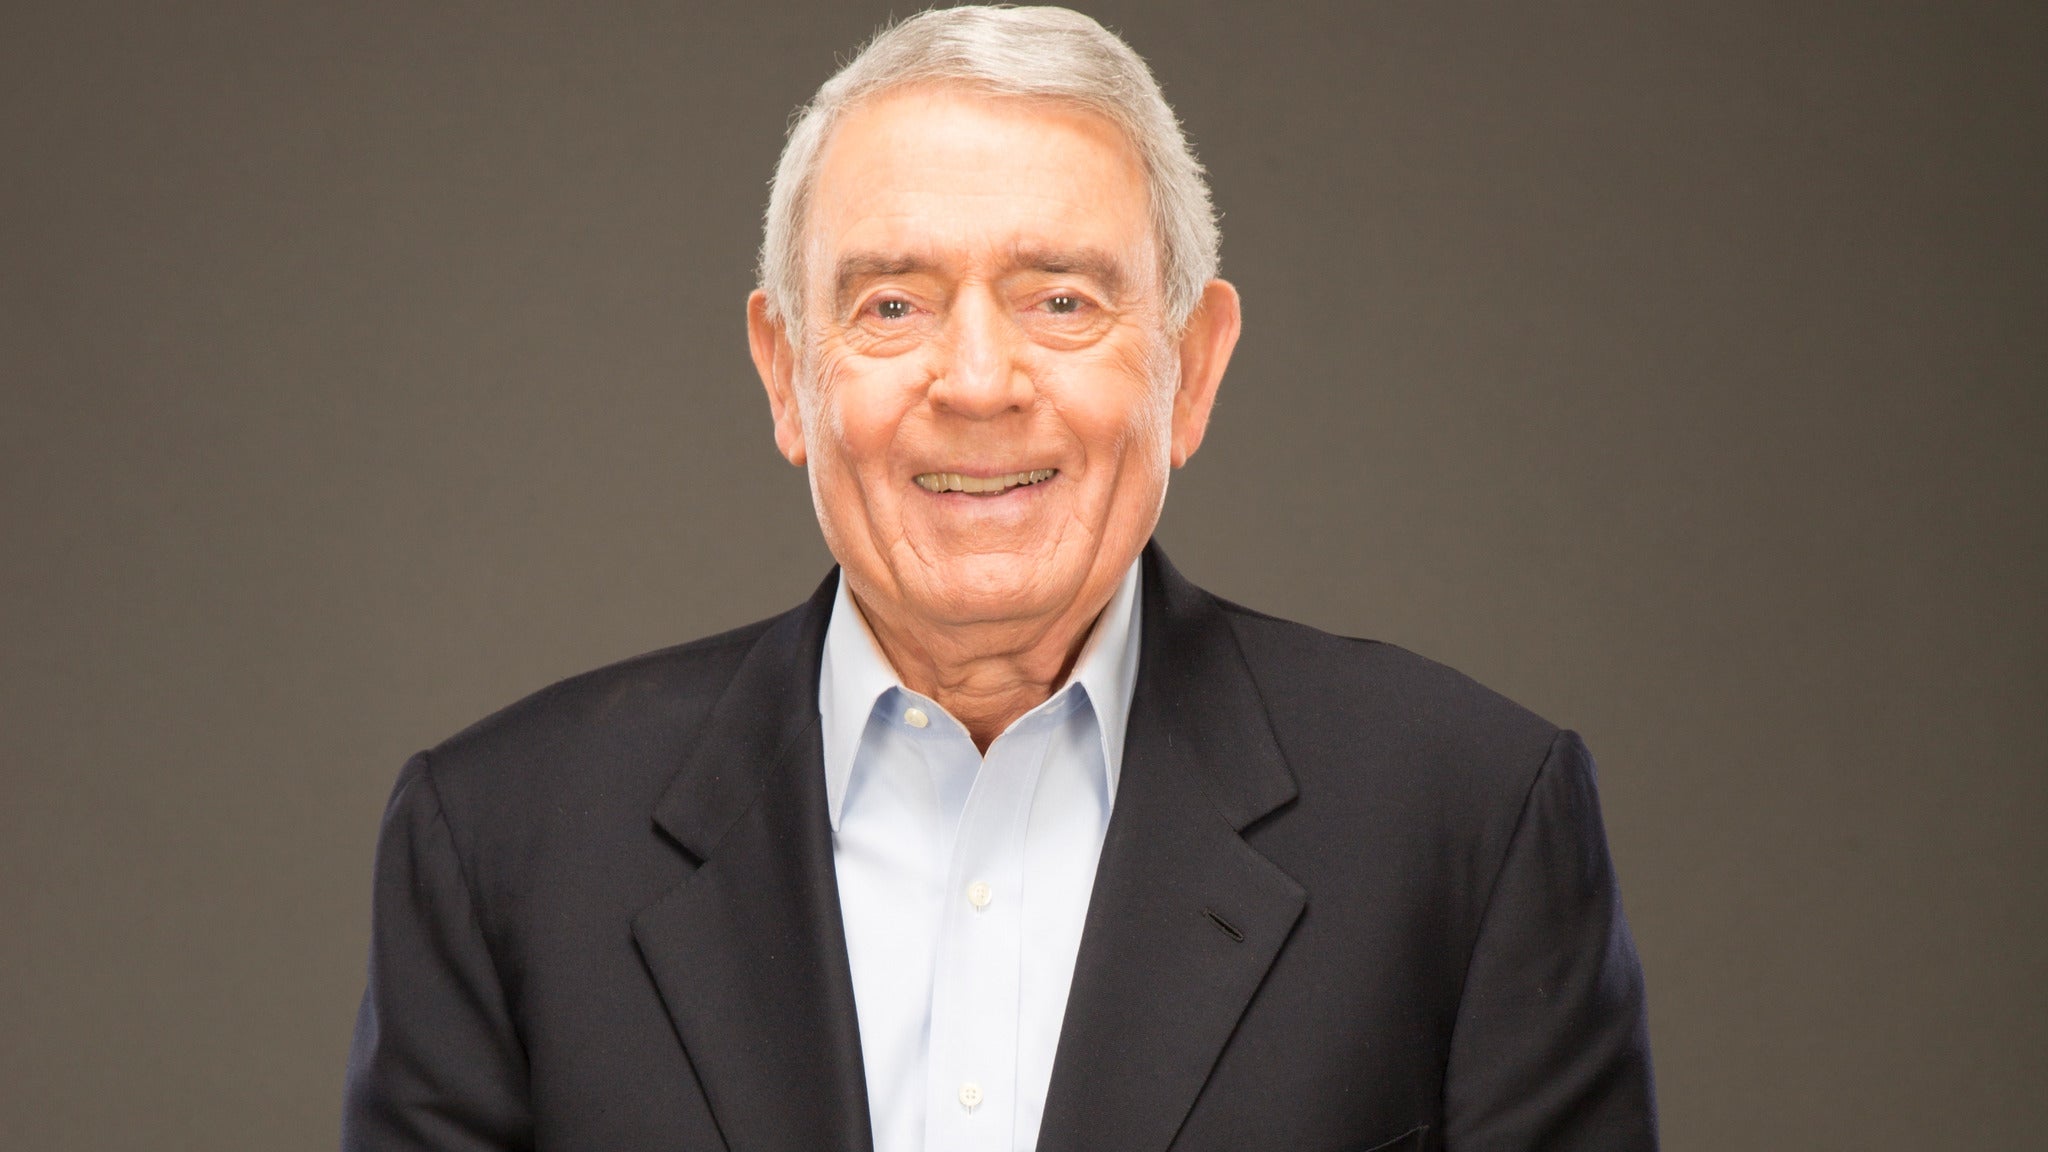 An Evening With Dan Rather in Riverside promo photo for Live Nation presale offer code